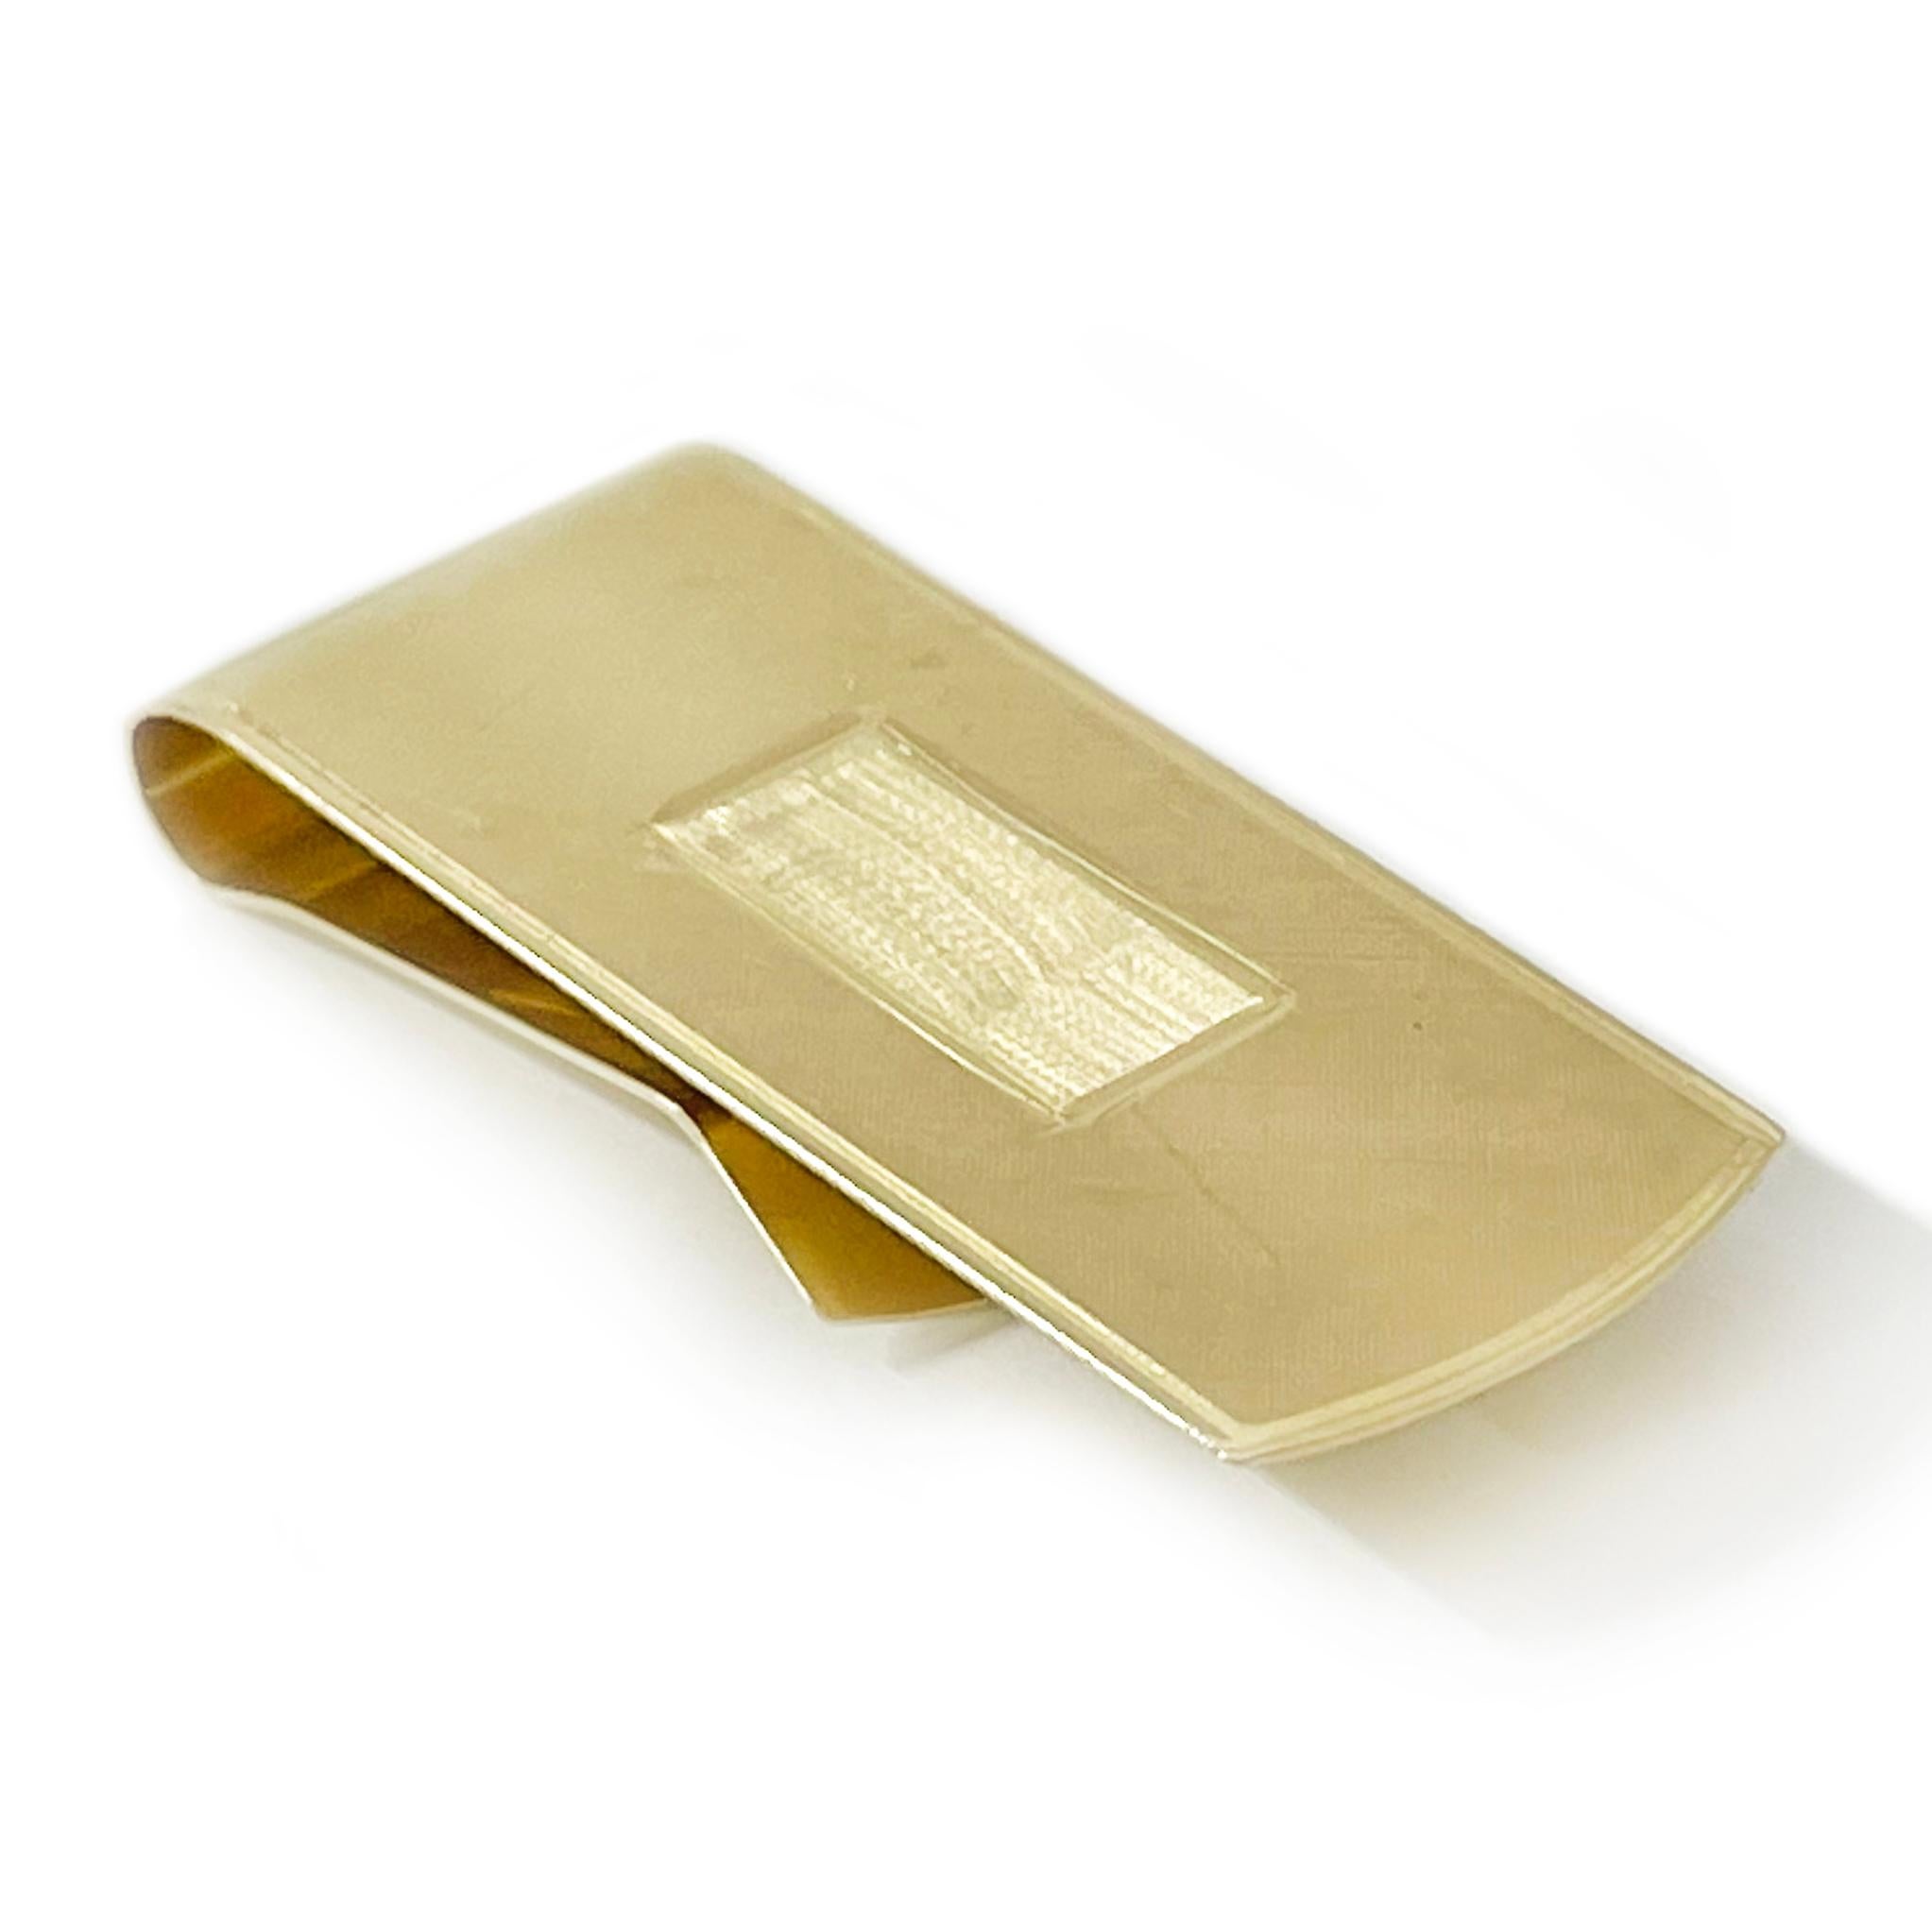 14 Karat Yellow Gold Engravable Money Clip. The money clip has a Florentine finish on the top and a smooth shiny finish on the back. The money clip measures 2.1